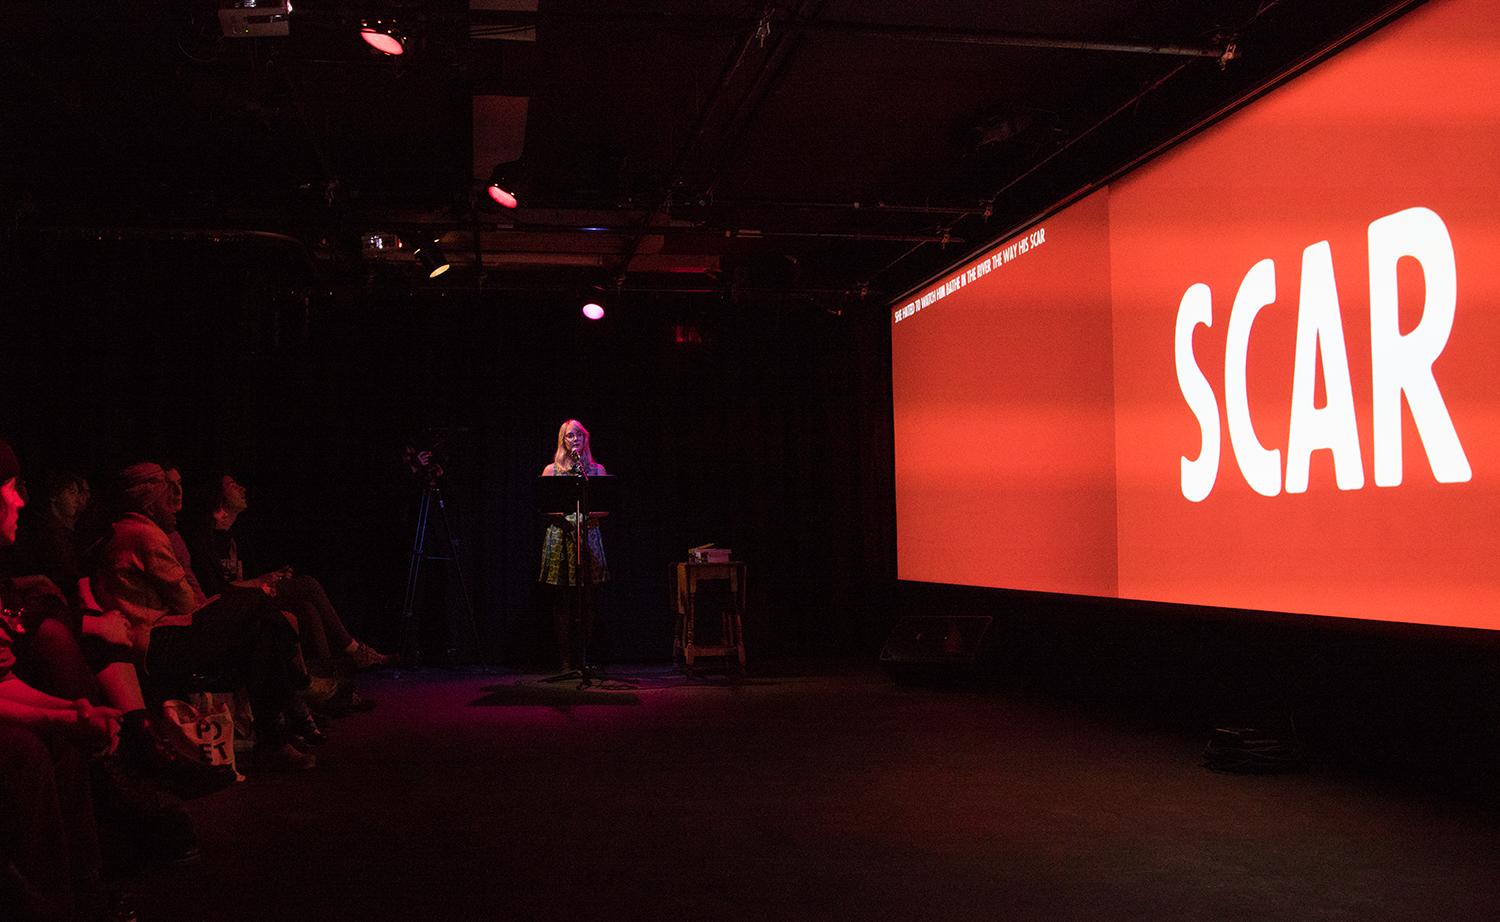 Poet Meghann Plunkett standing in front of a large projected screen with the word SCAR